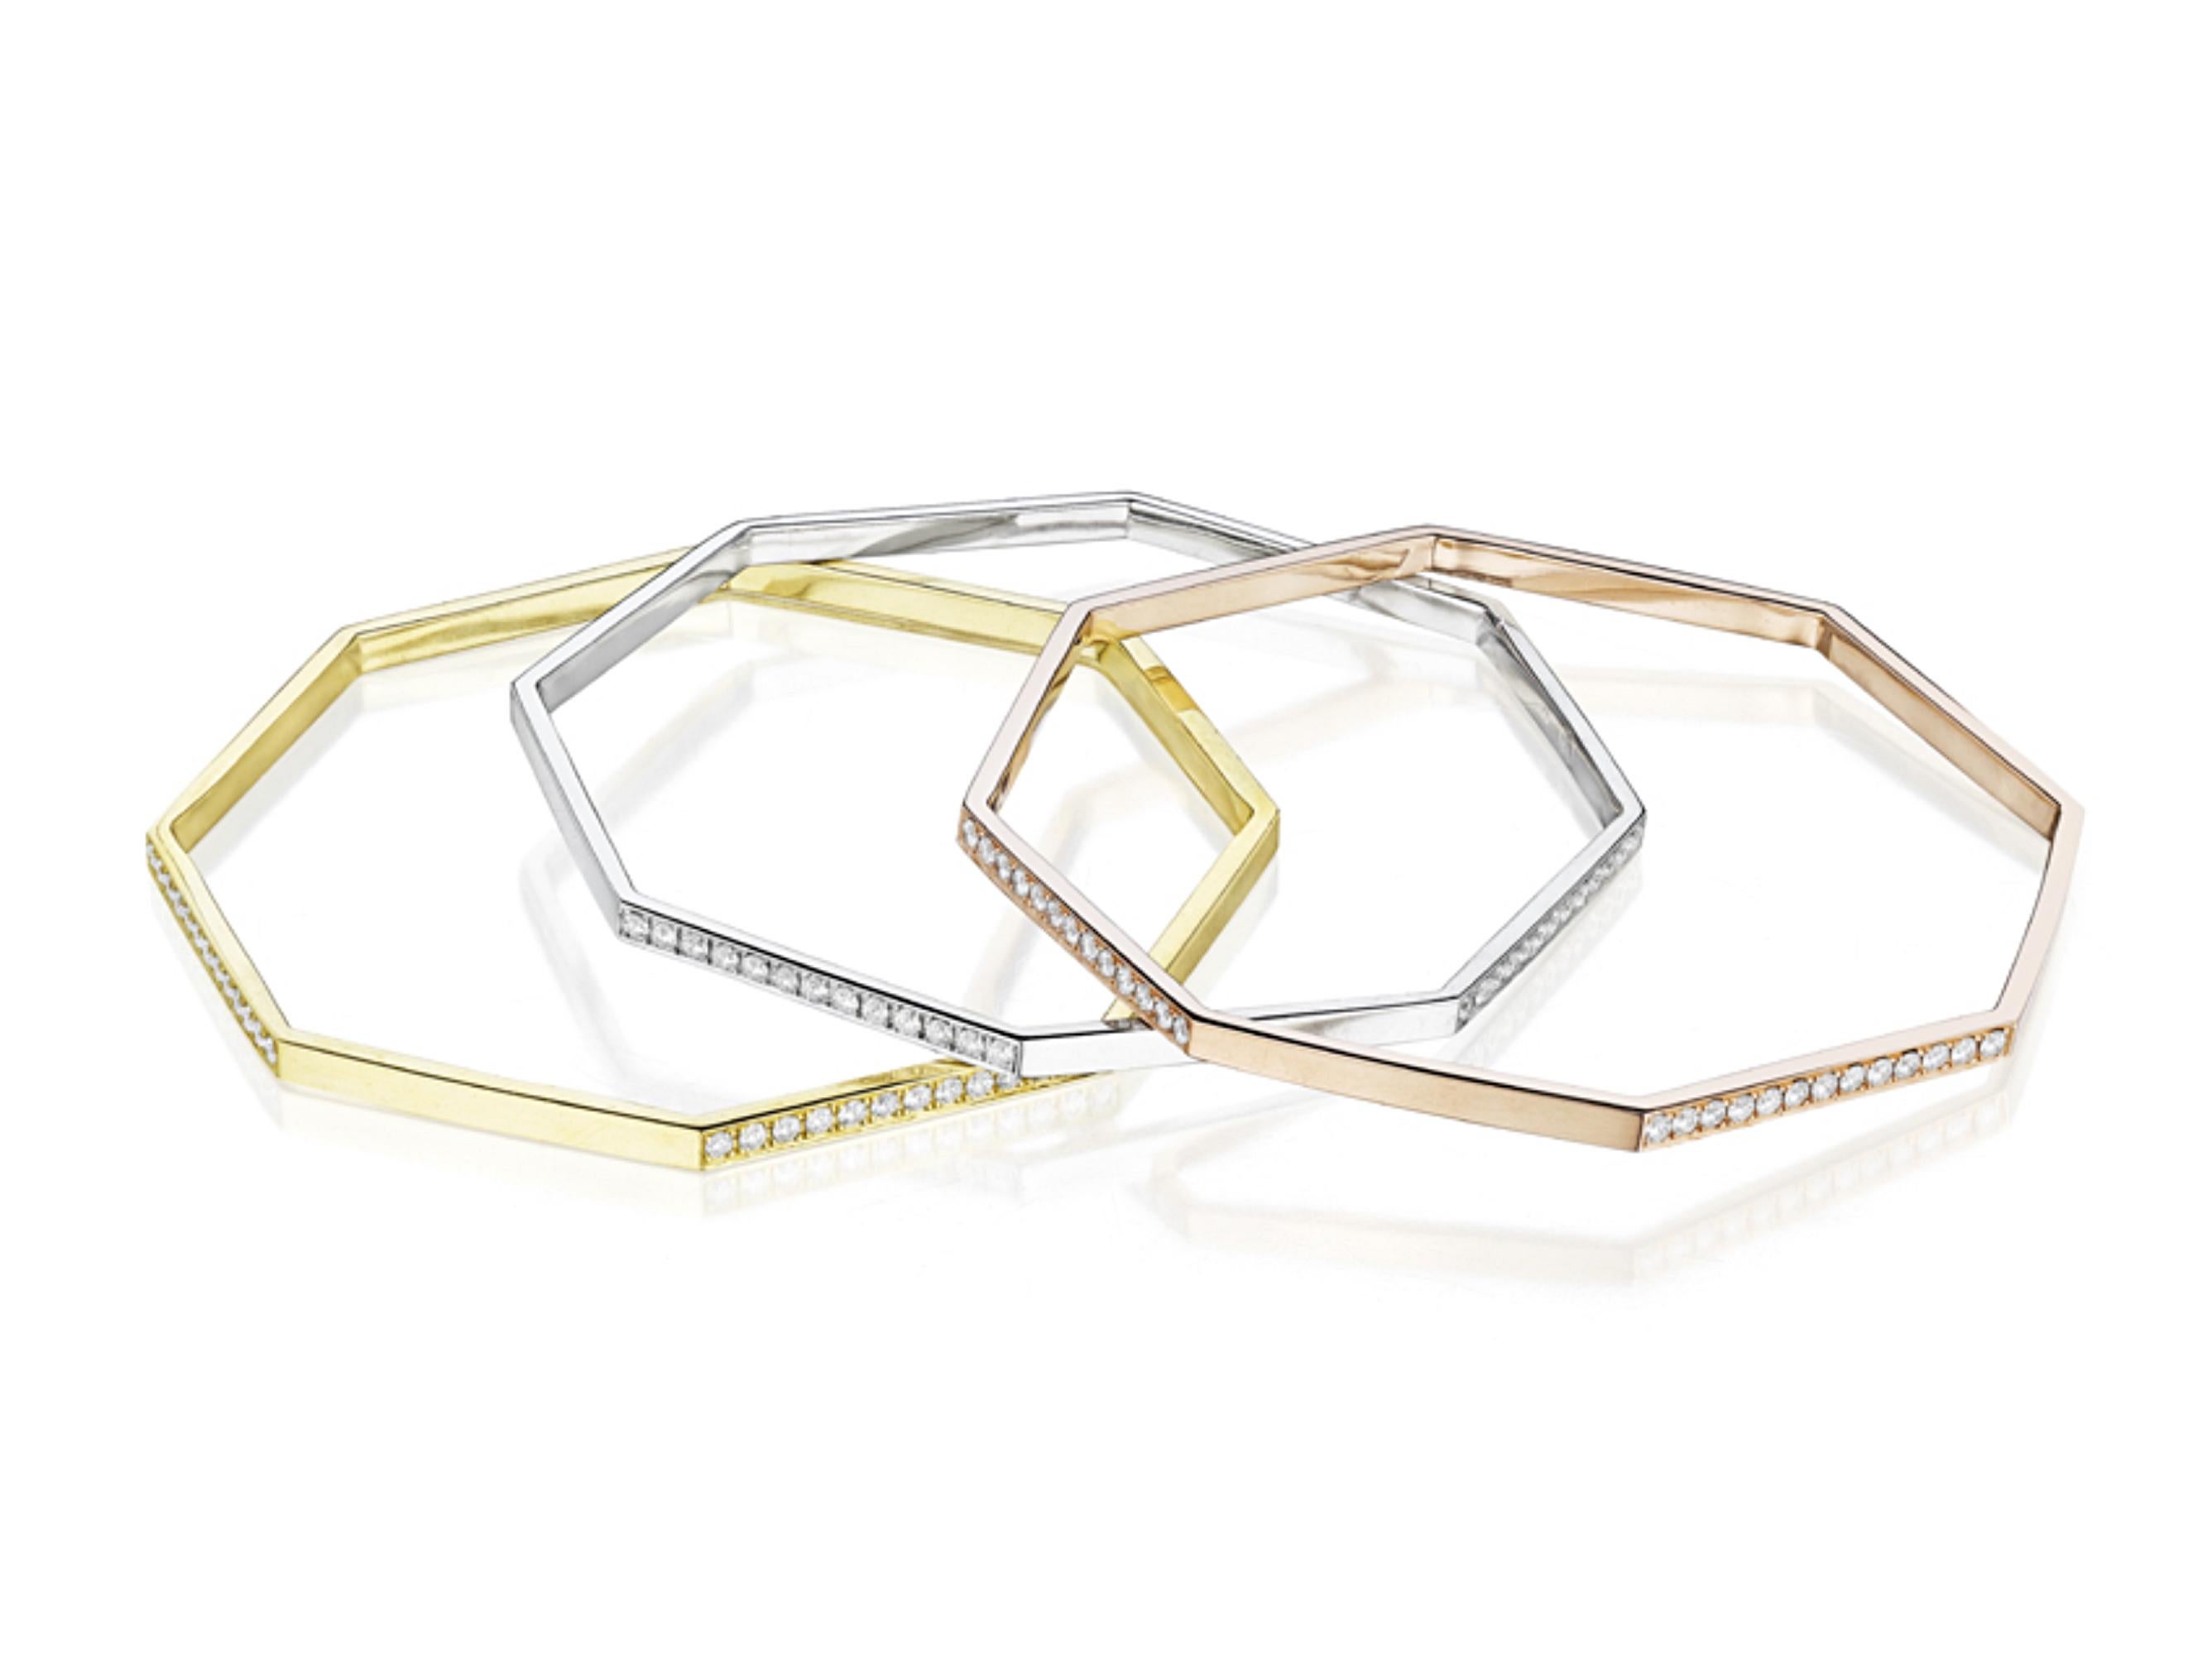 Specs: 18k Yellow Gold hexagon shaped bangle with White Diamonds. 

Story:  A self-described minimalist with a substantial background in fashion and art, Kerri Halpern created MadStone in 2010 as part of her lifelong quest to find the perfect